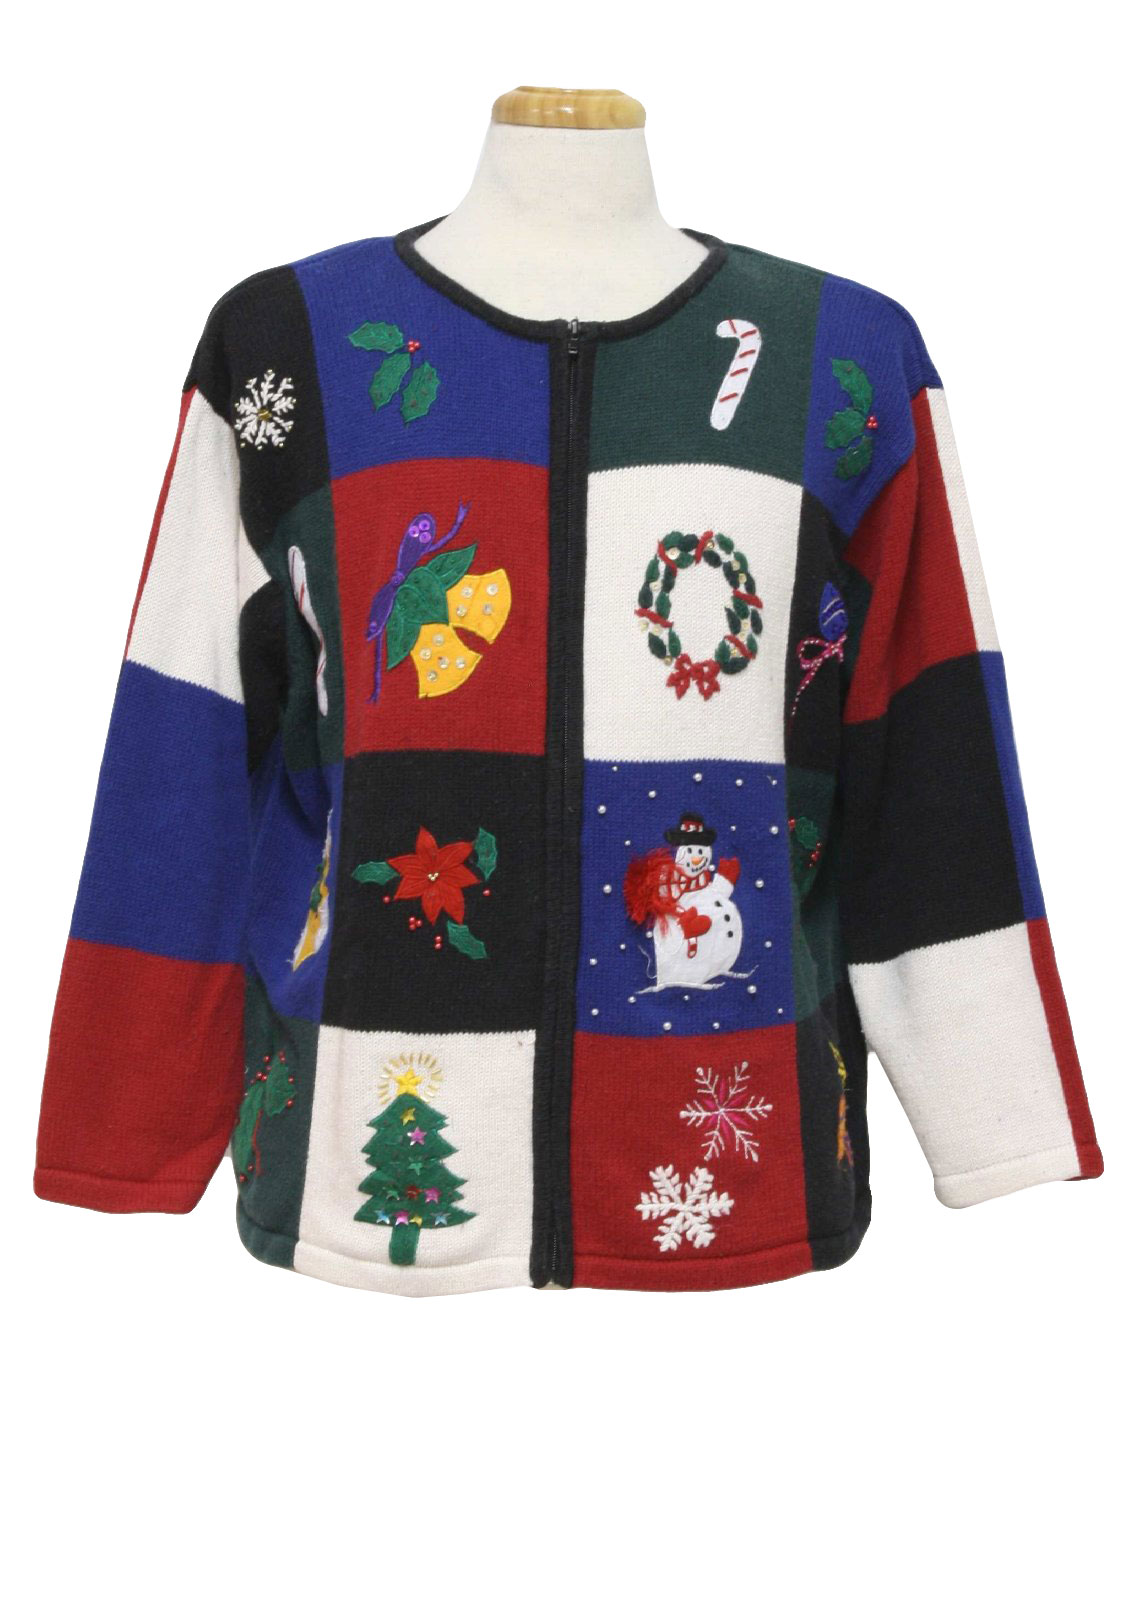 Ugly Christmas Sweater: -Dress Barn- Unisex black, blue, red and green ...